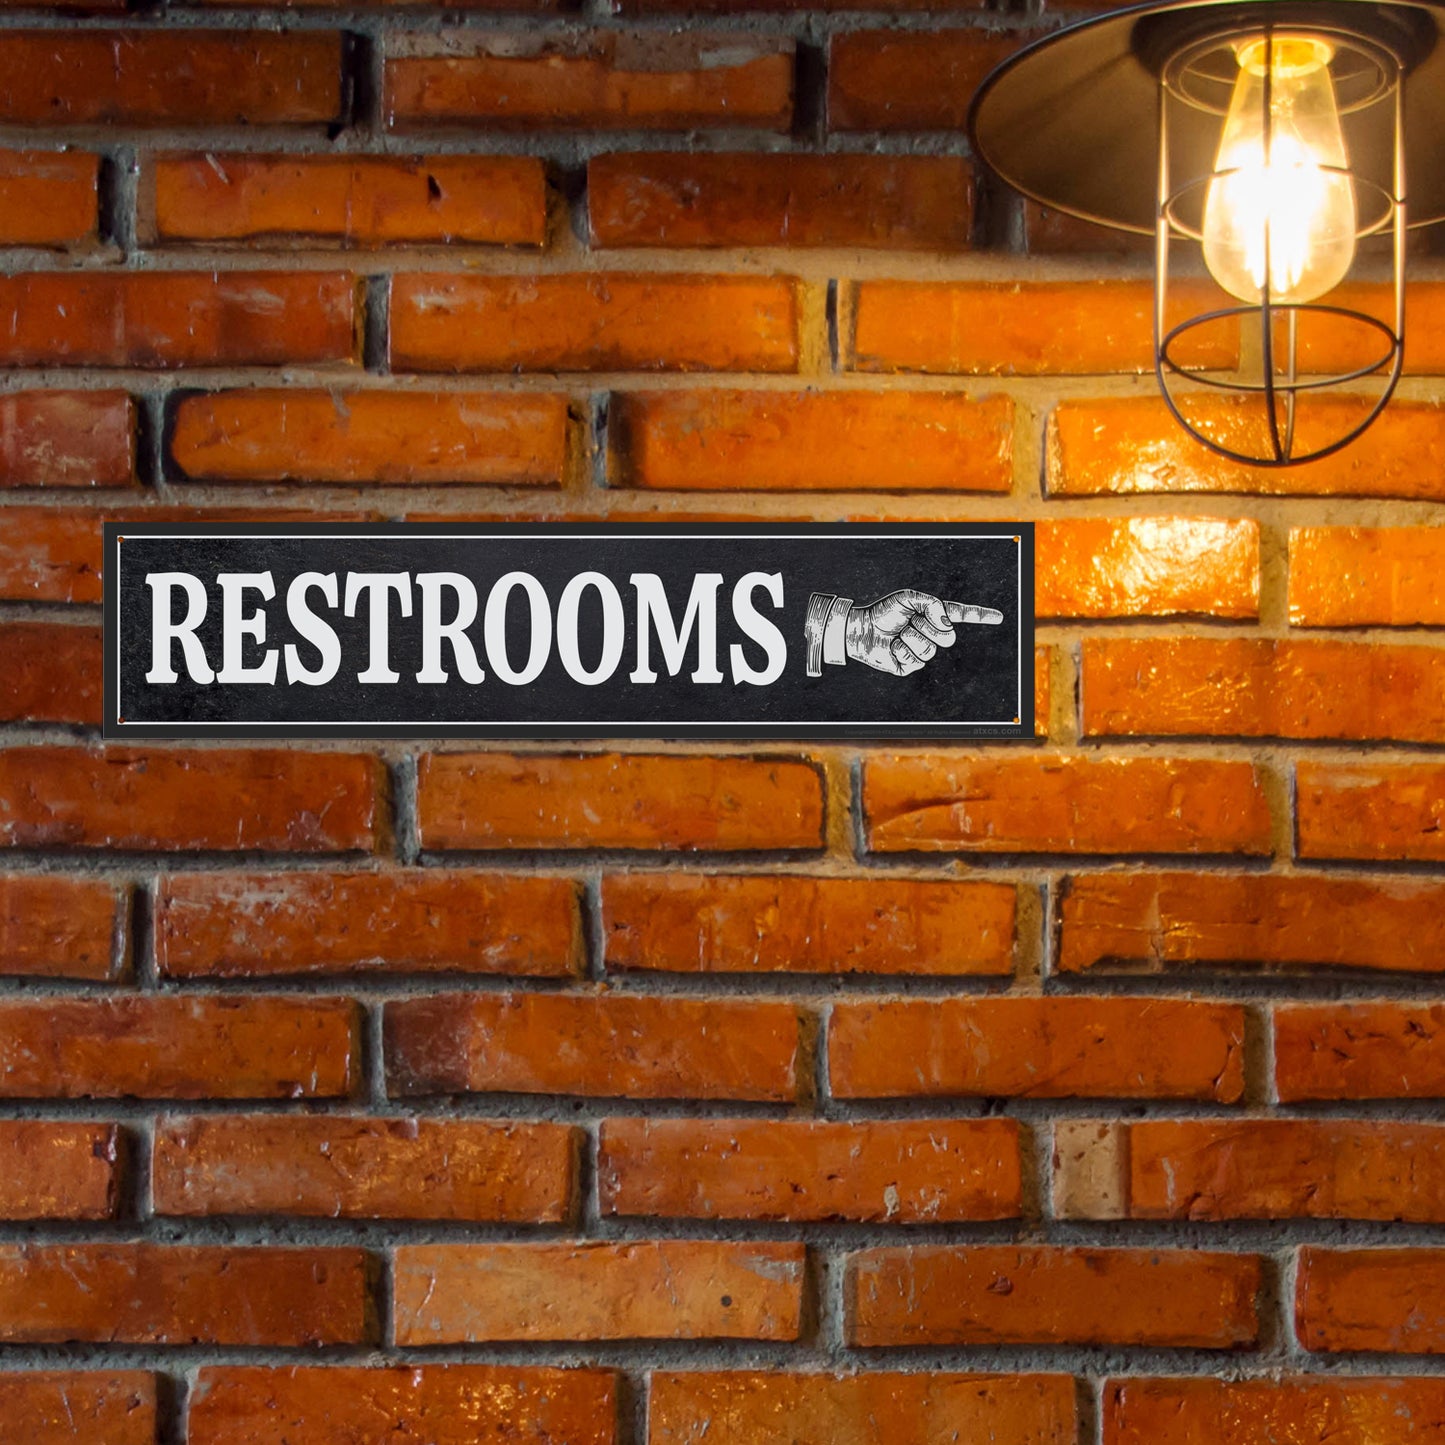 ATX CUSTOM SIGNS - Dark Rustic Restroom Hand Pointing Signs - Double Sided Left or Right Pointing 2 Signs Pack